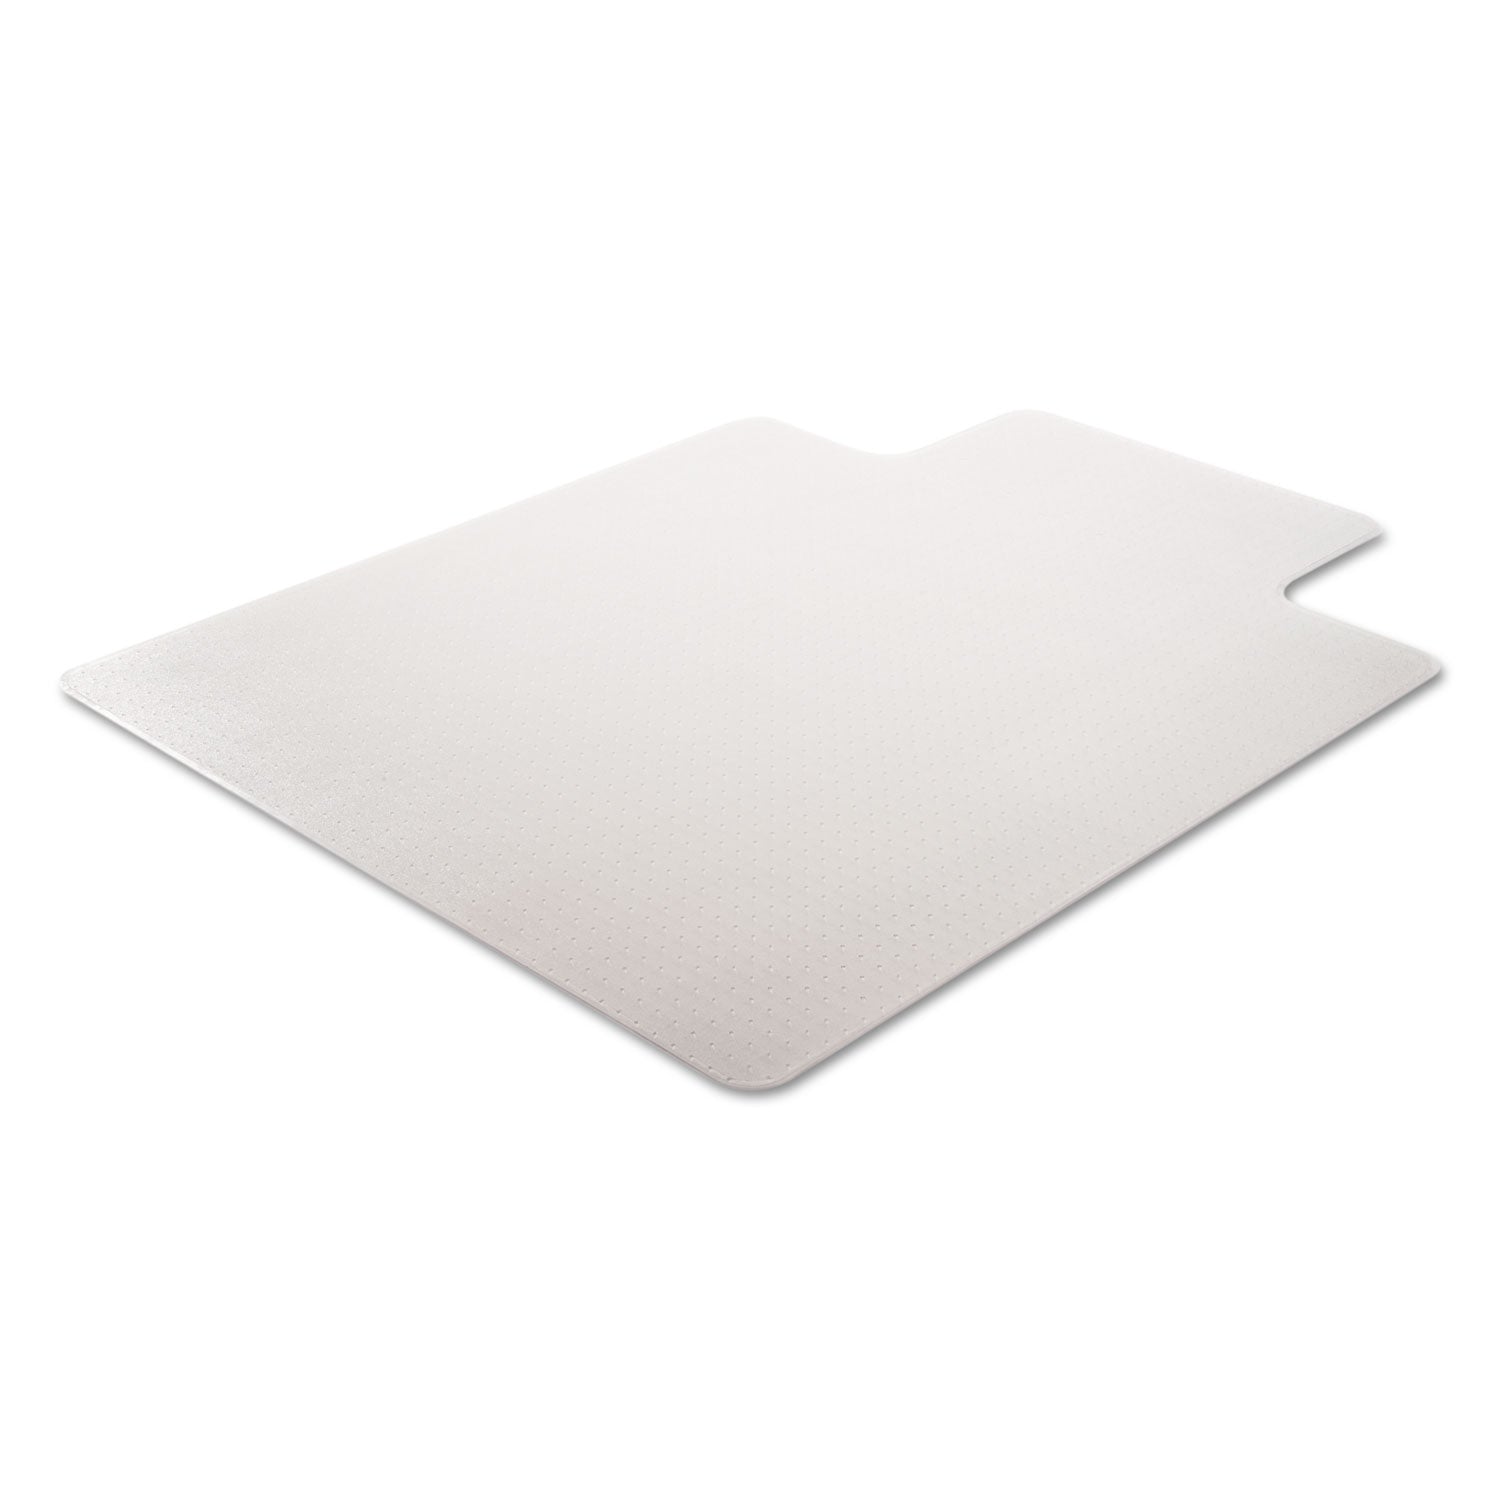 DuraMat Moderate Use Chair Mat for Low Pile Carpet, 46 x 60, Wide Lipped, Clear - 7